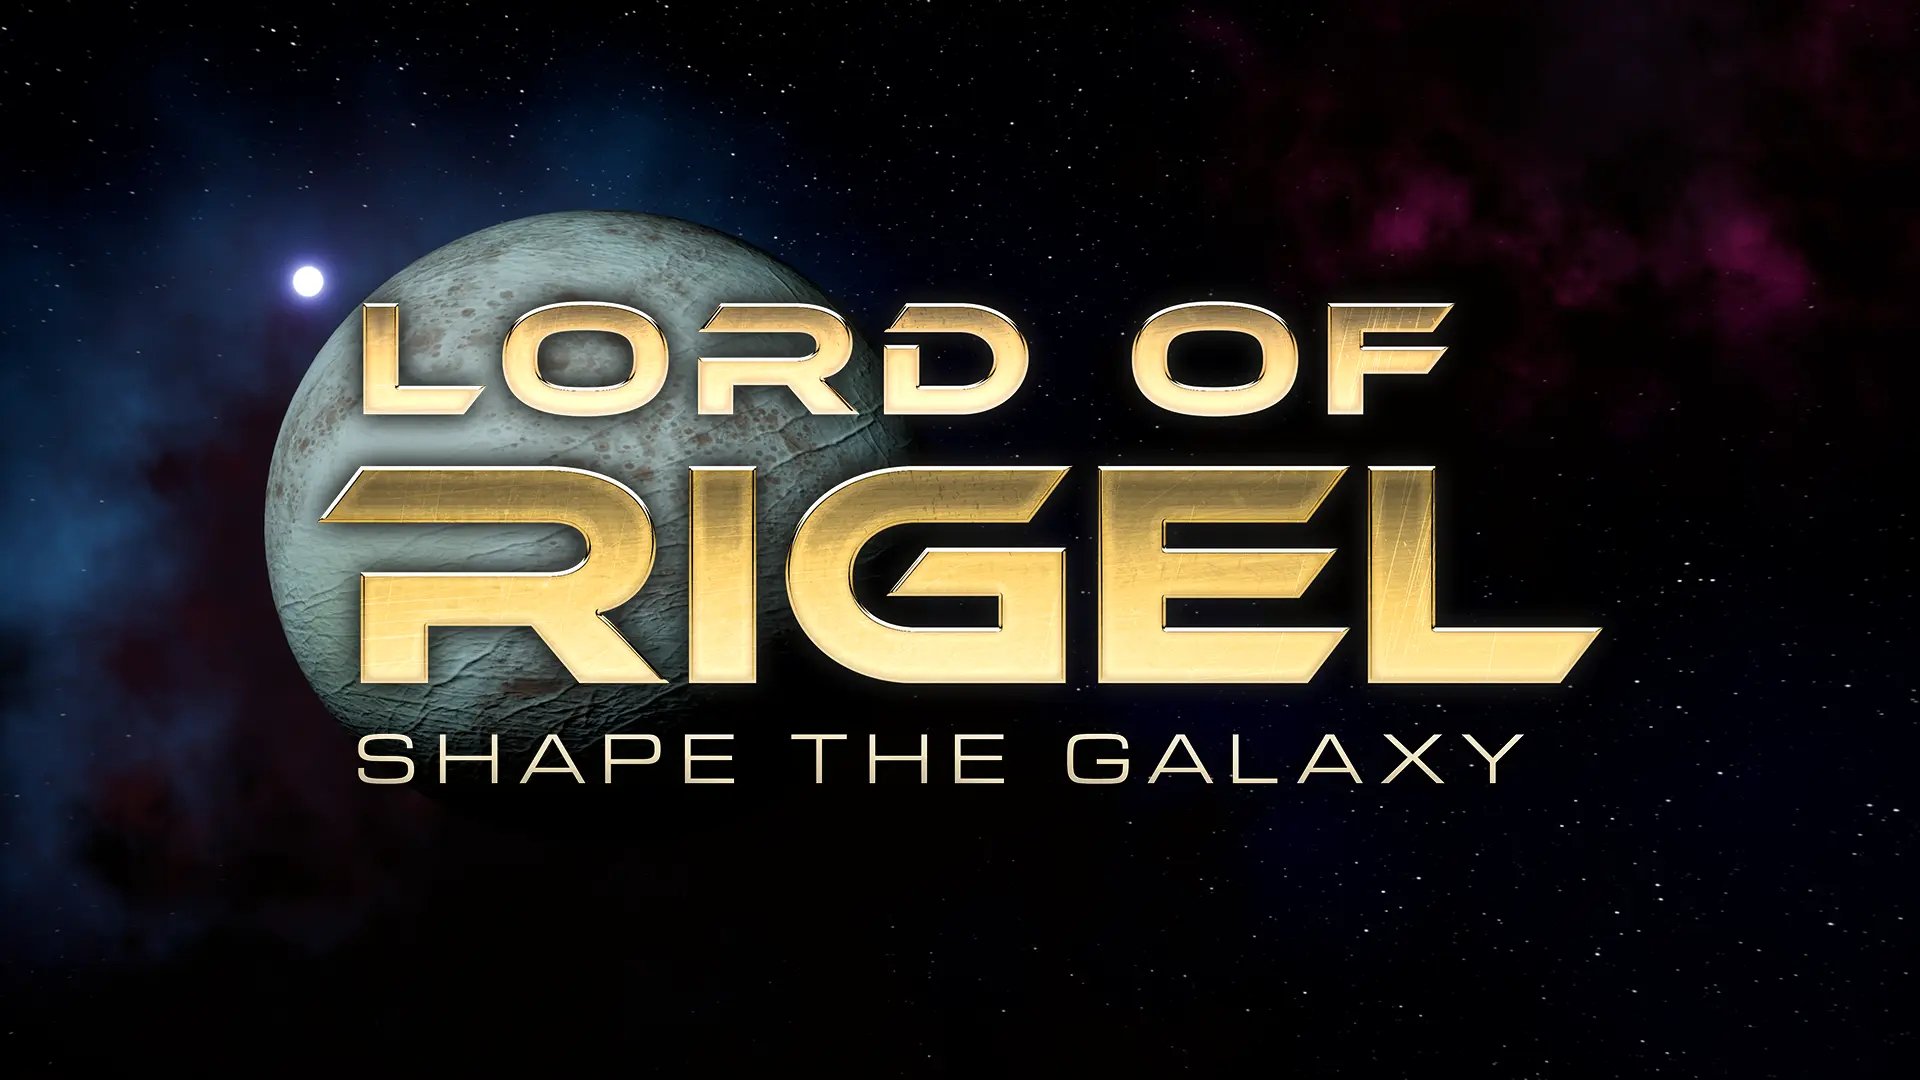 lord of rigel price